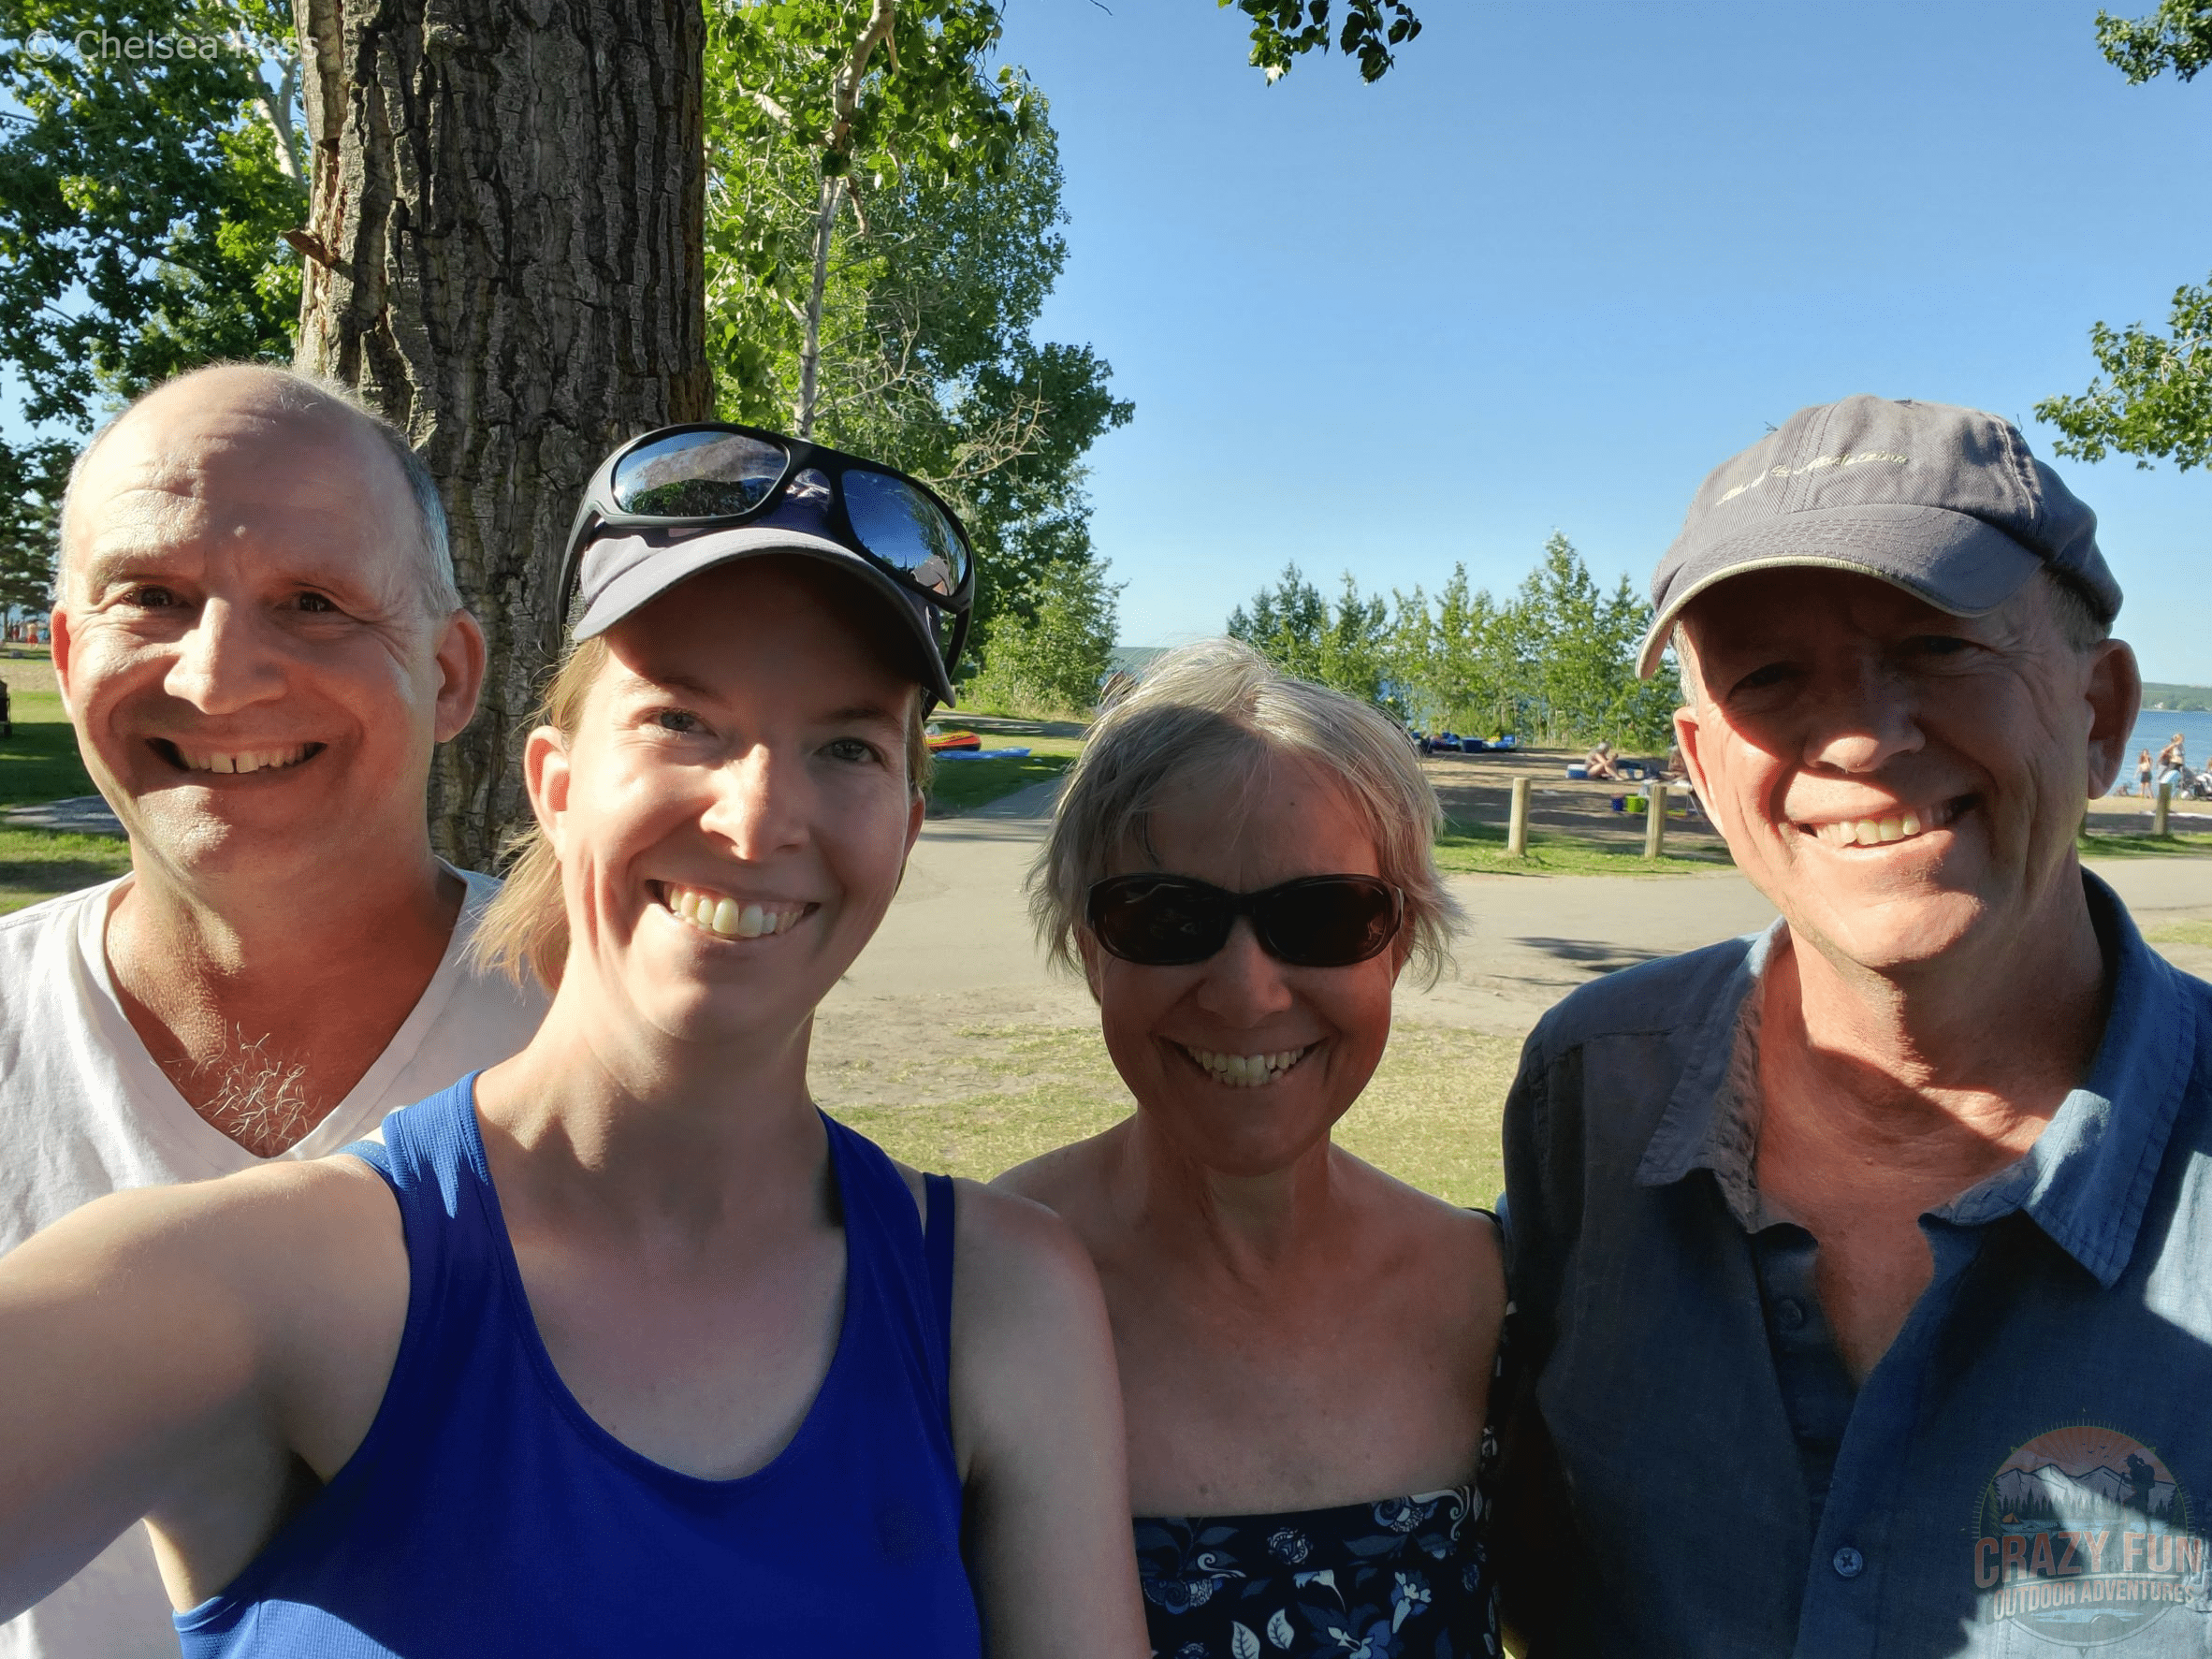 Selfie of four people. Left to right: white shirt, blue tank top, blue swimsuit and blue shirt in front of trees.